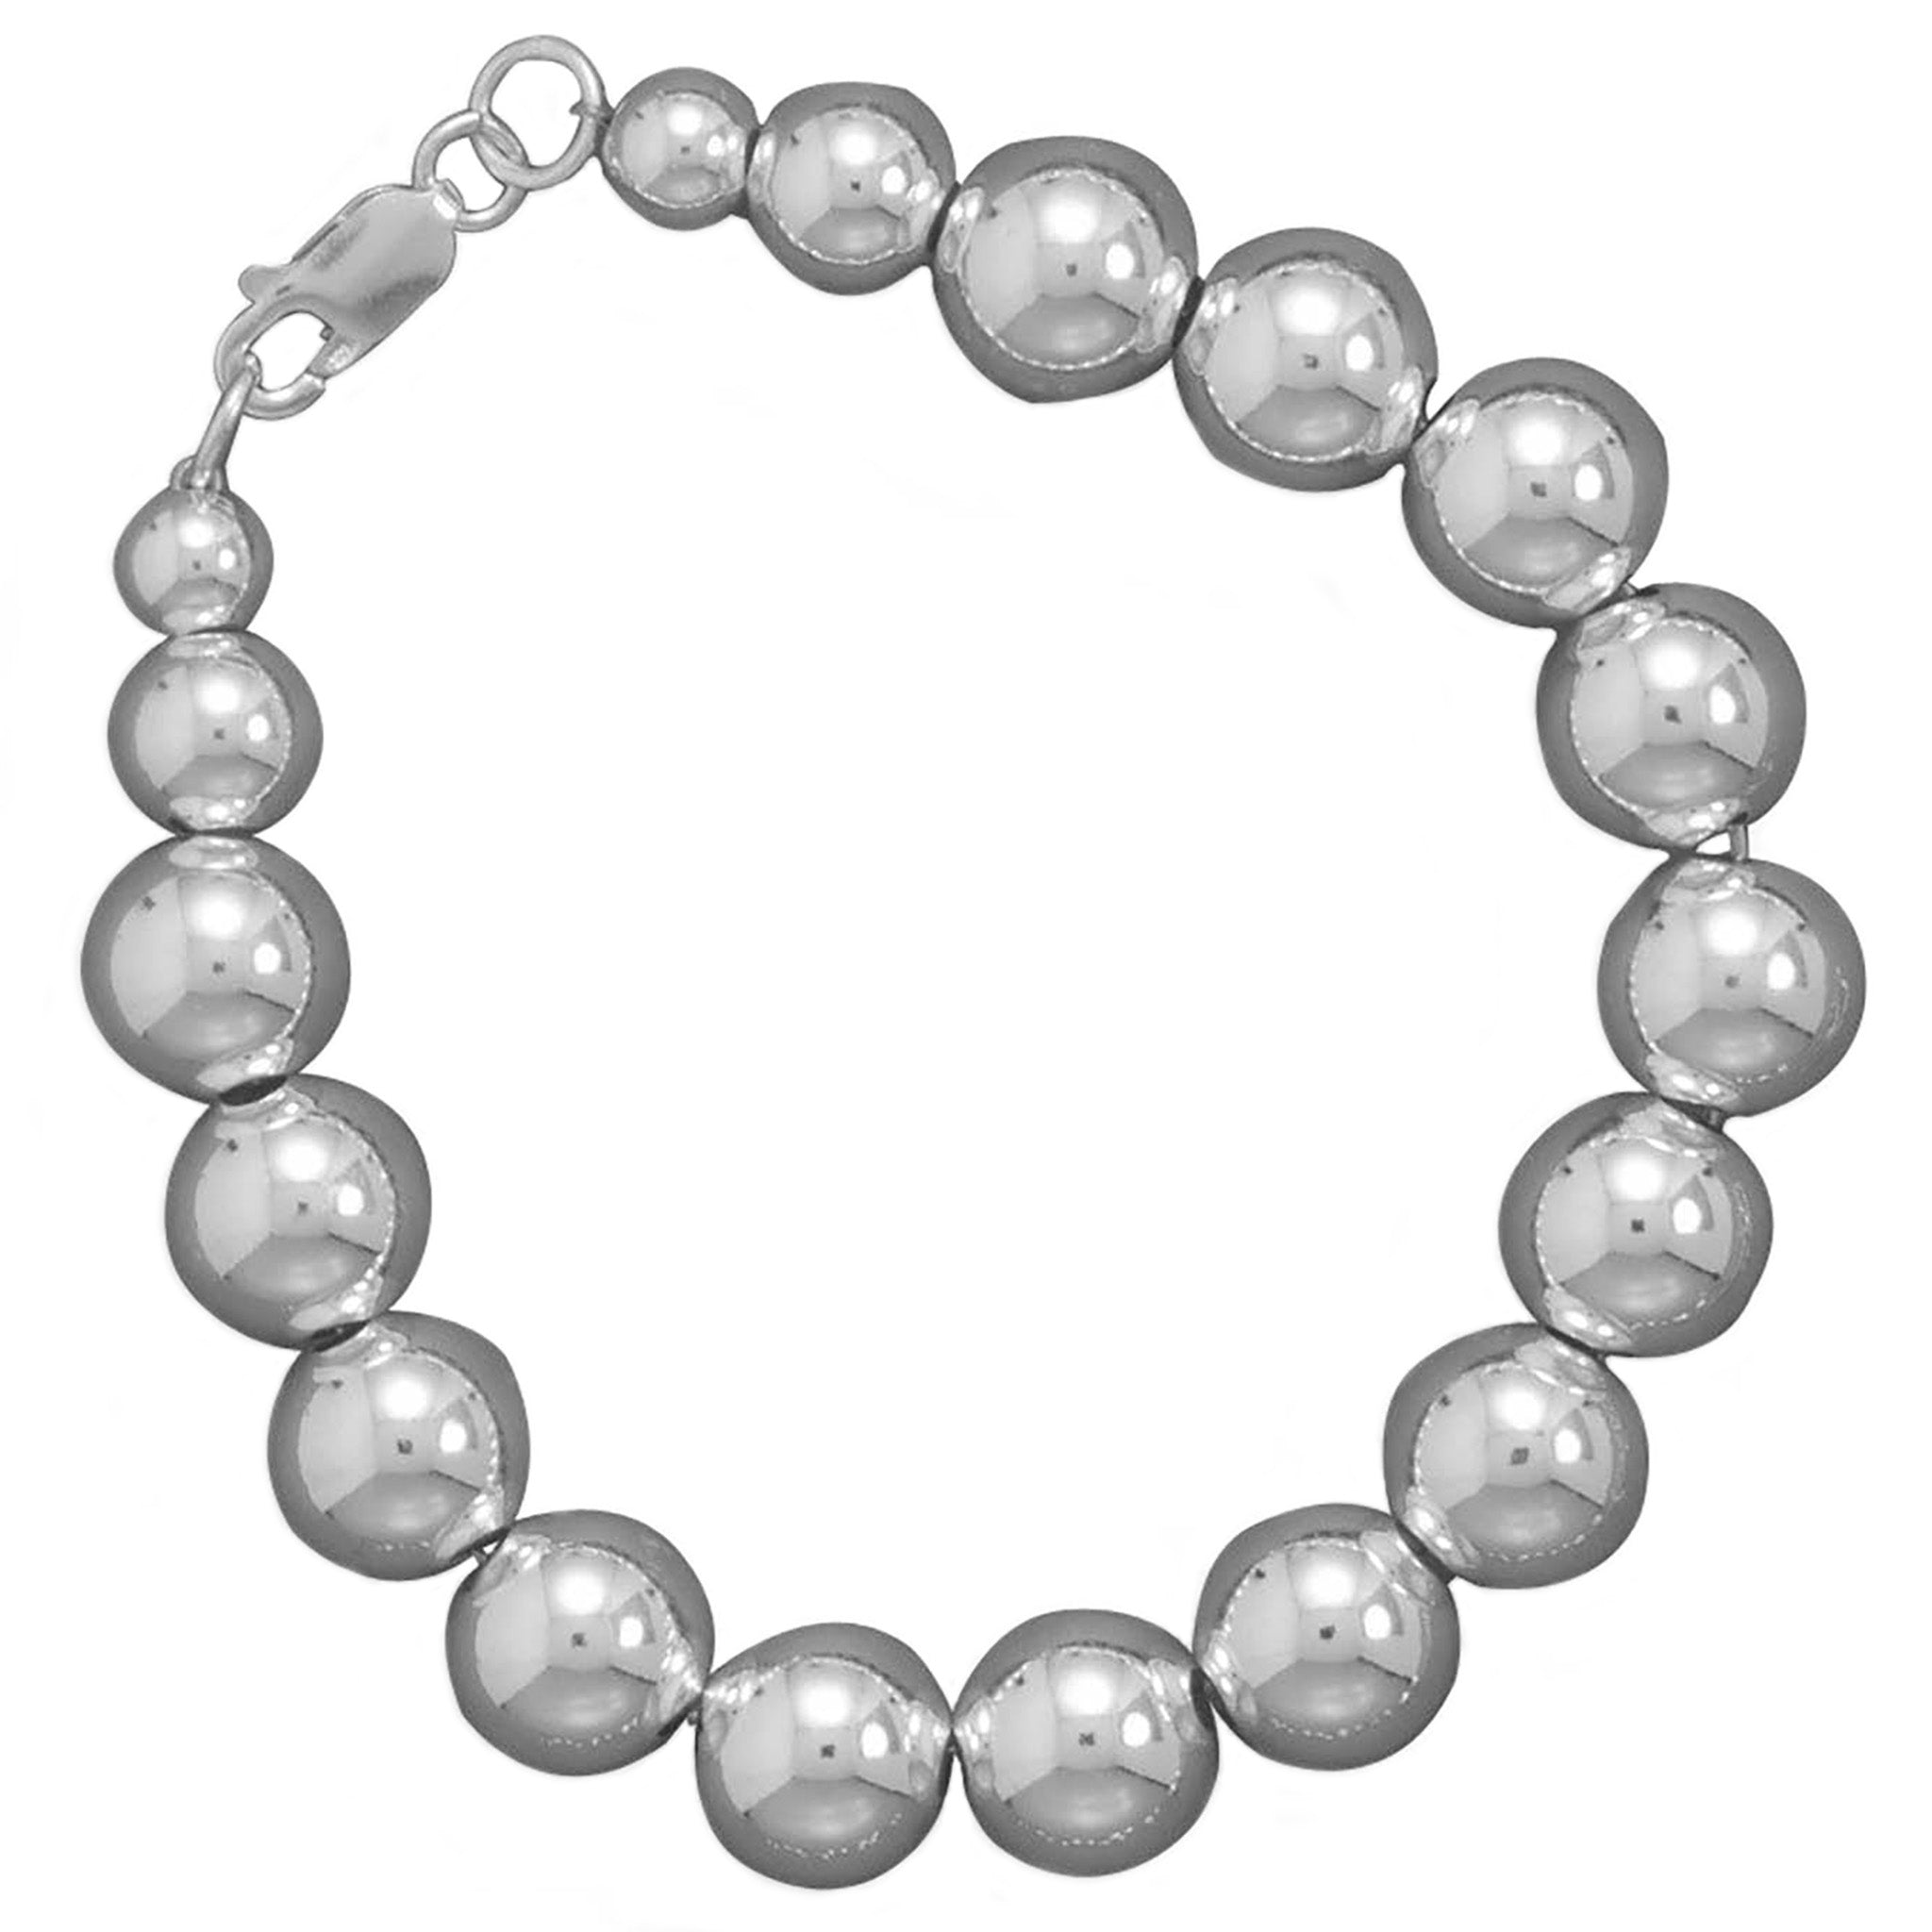 10mm Silver Bead Strand Necklace